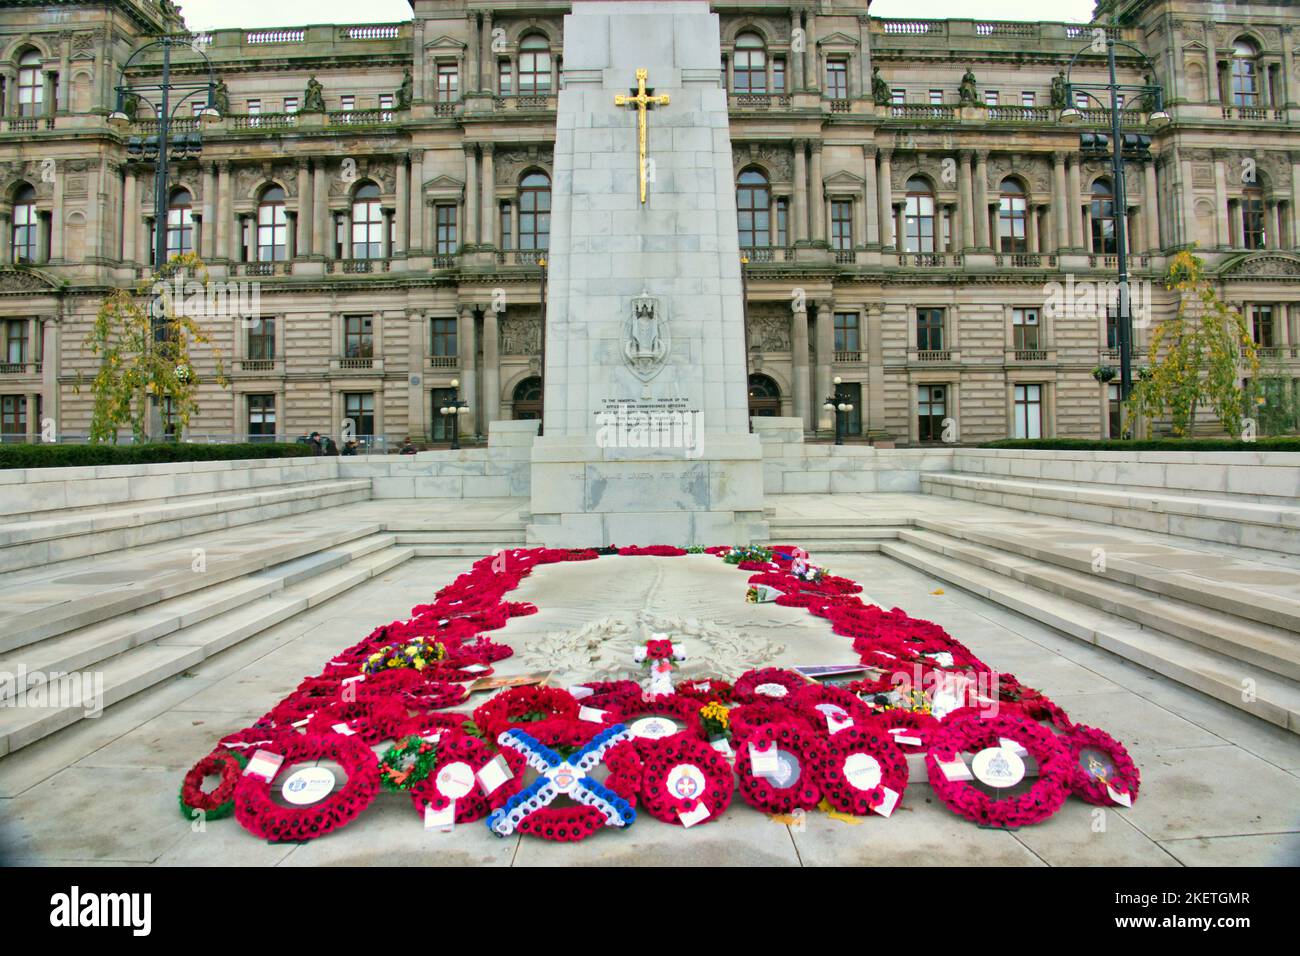 the cenotaph in front of the city council chambers in George square for remembrance Sunday Stock Photo